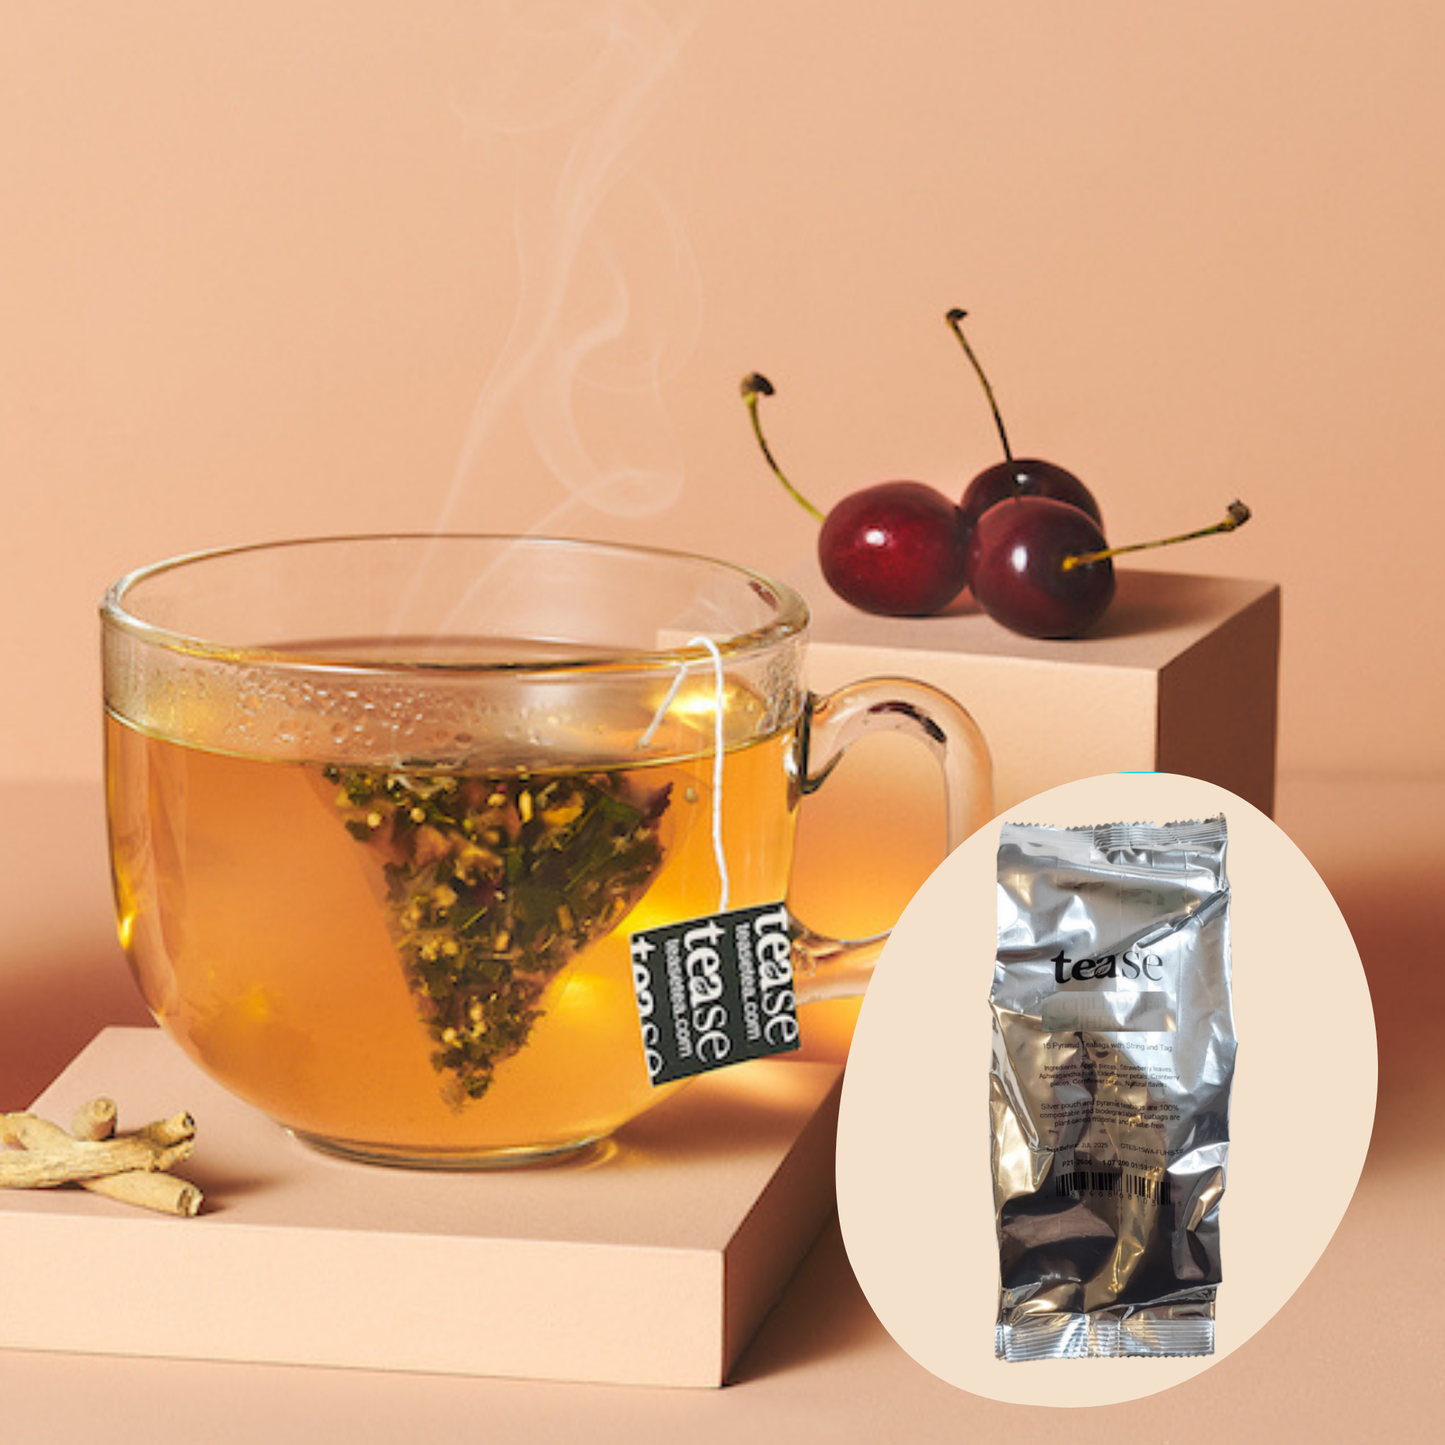 Tease - Chill Out Cherry Tea Refill | All Natural Adaptogenic Tea